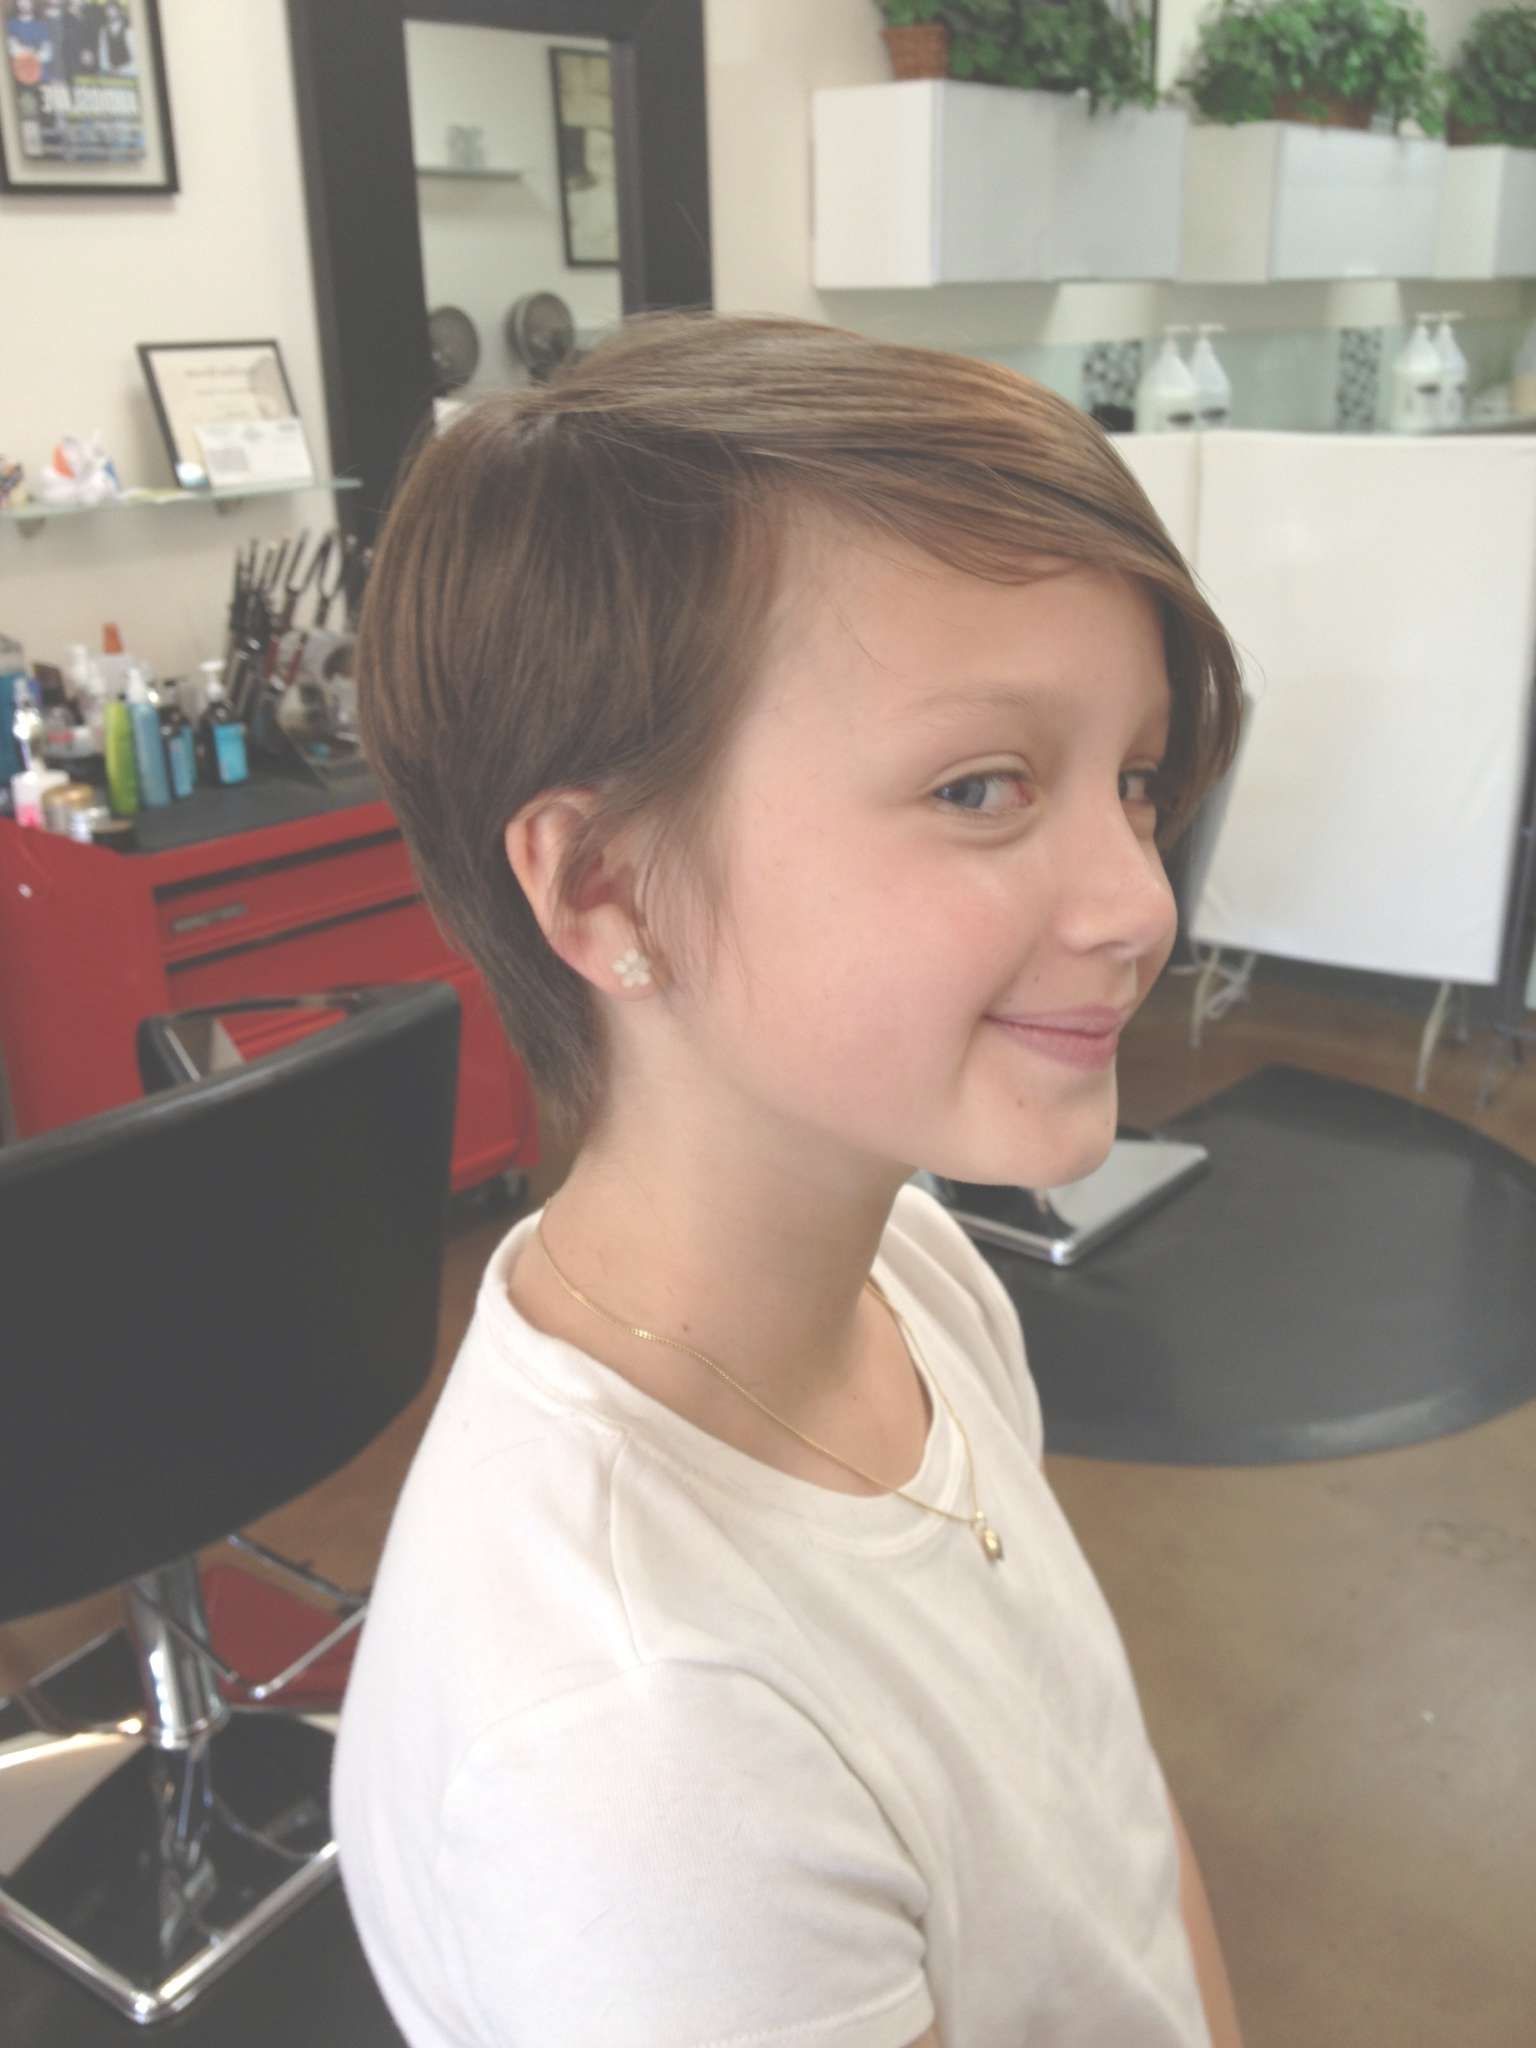 Cool Pixie Cut For A Tween (View 7 of 16)